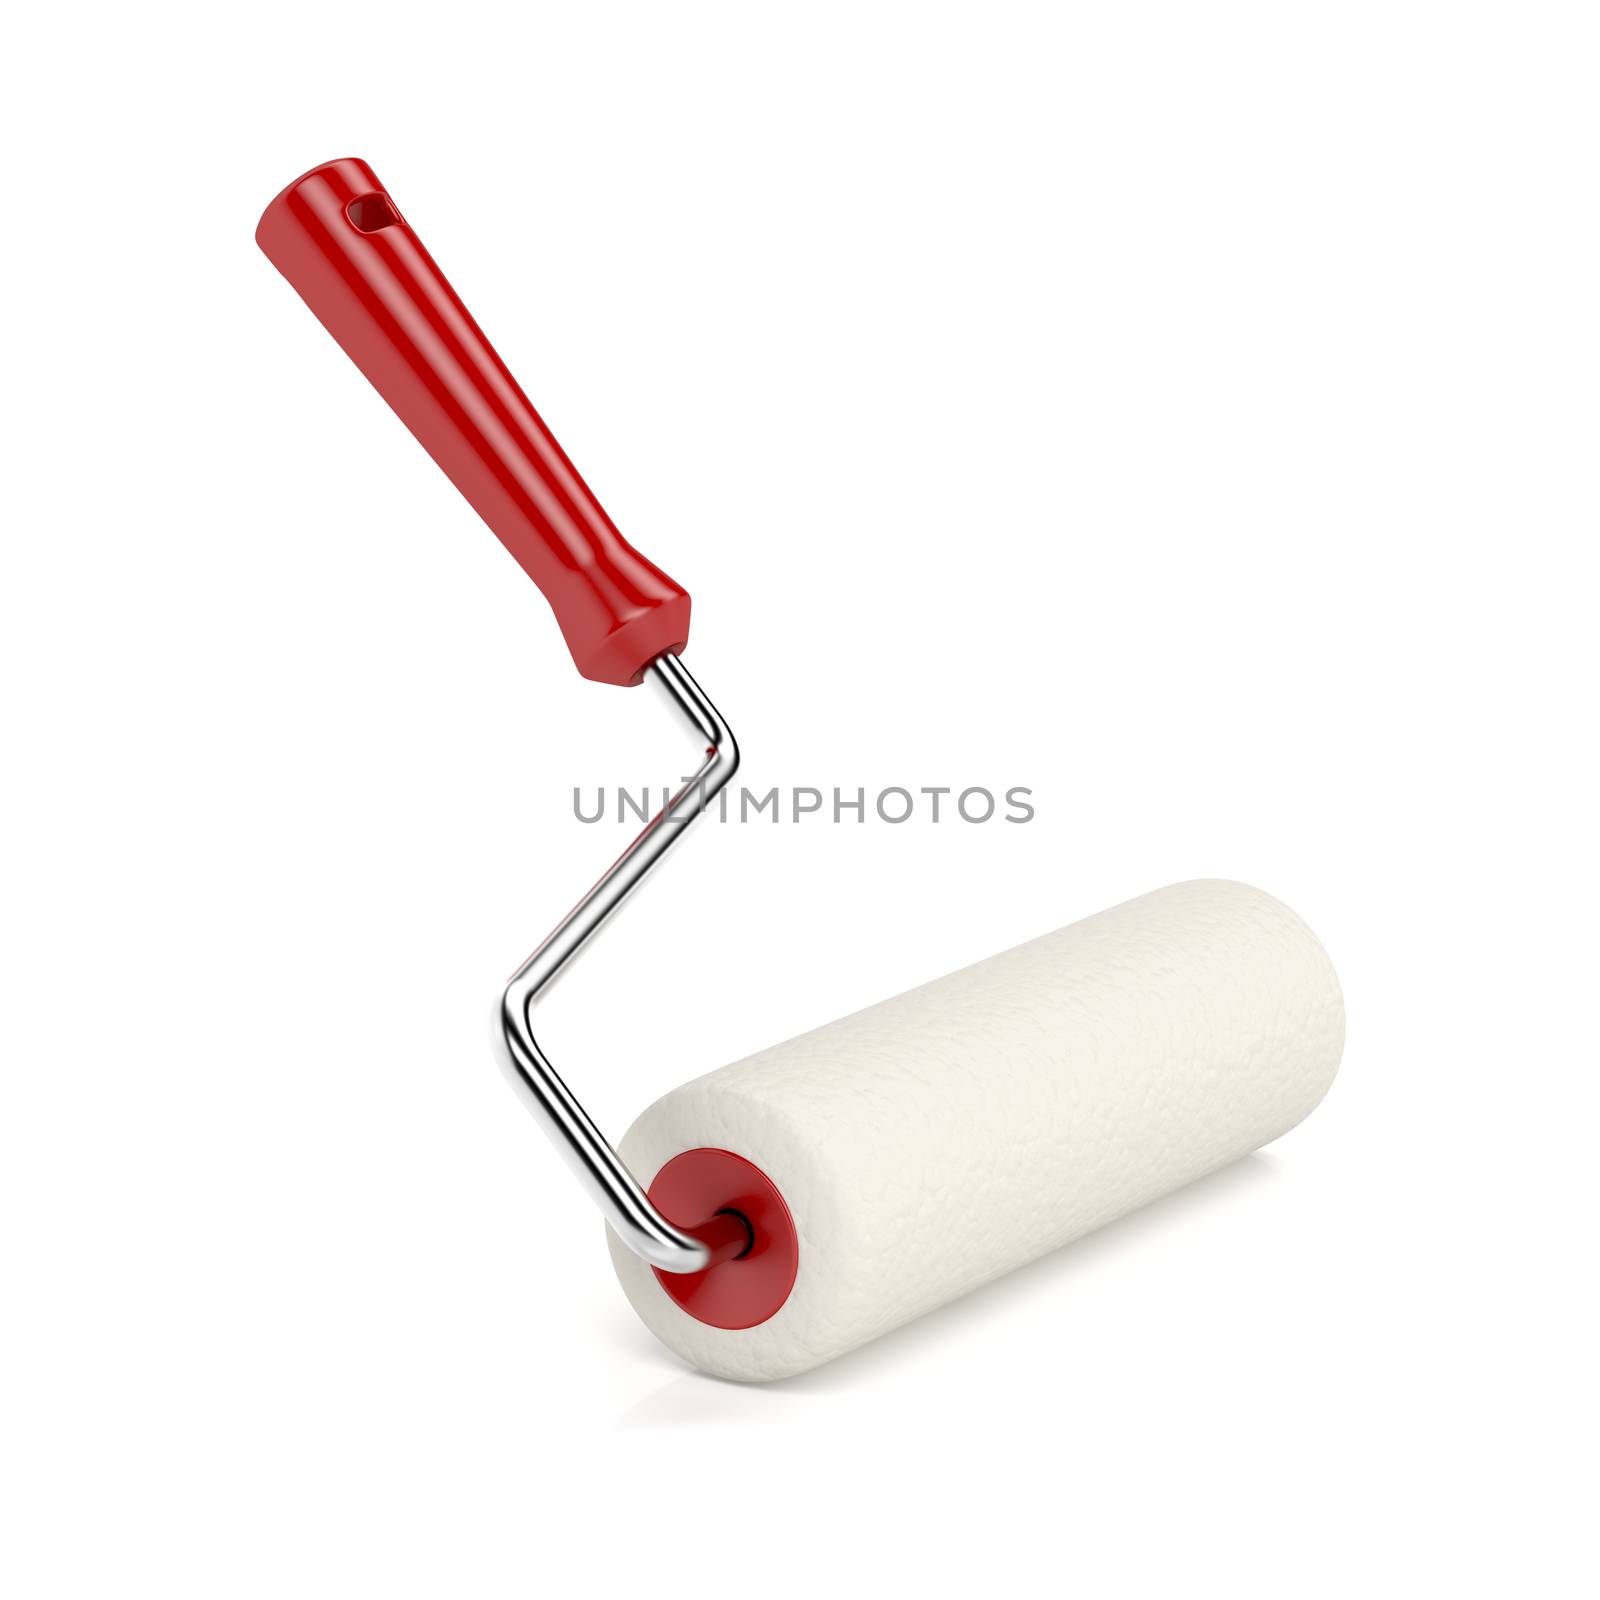 Paint roller by magraphics